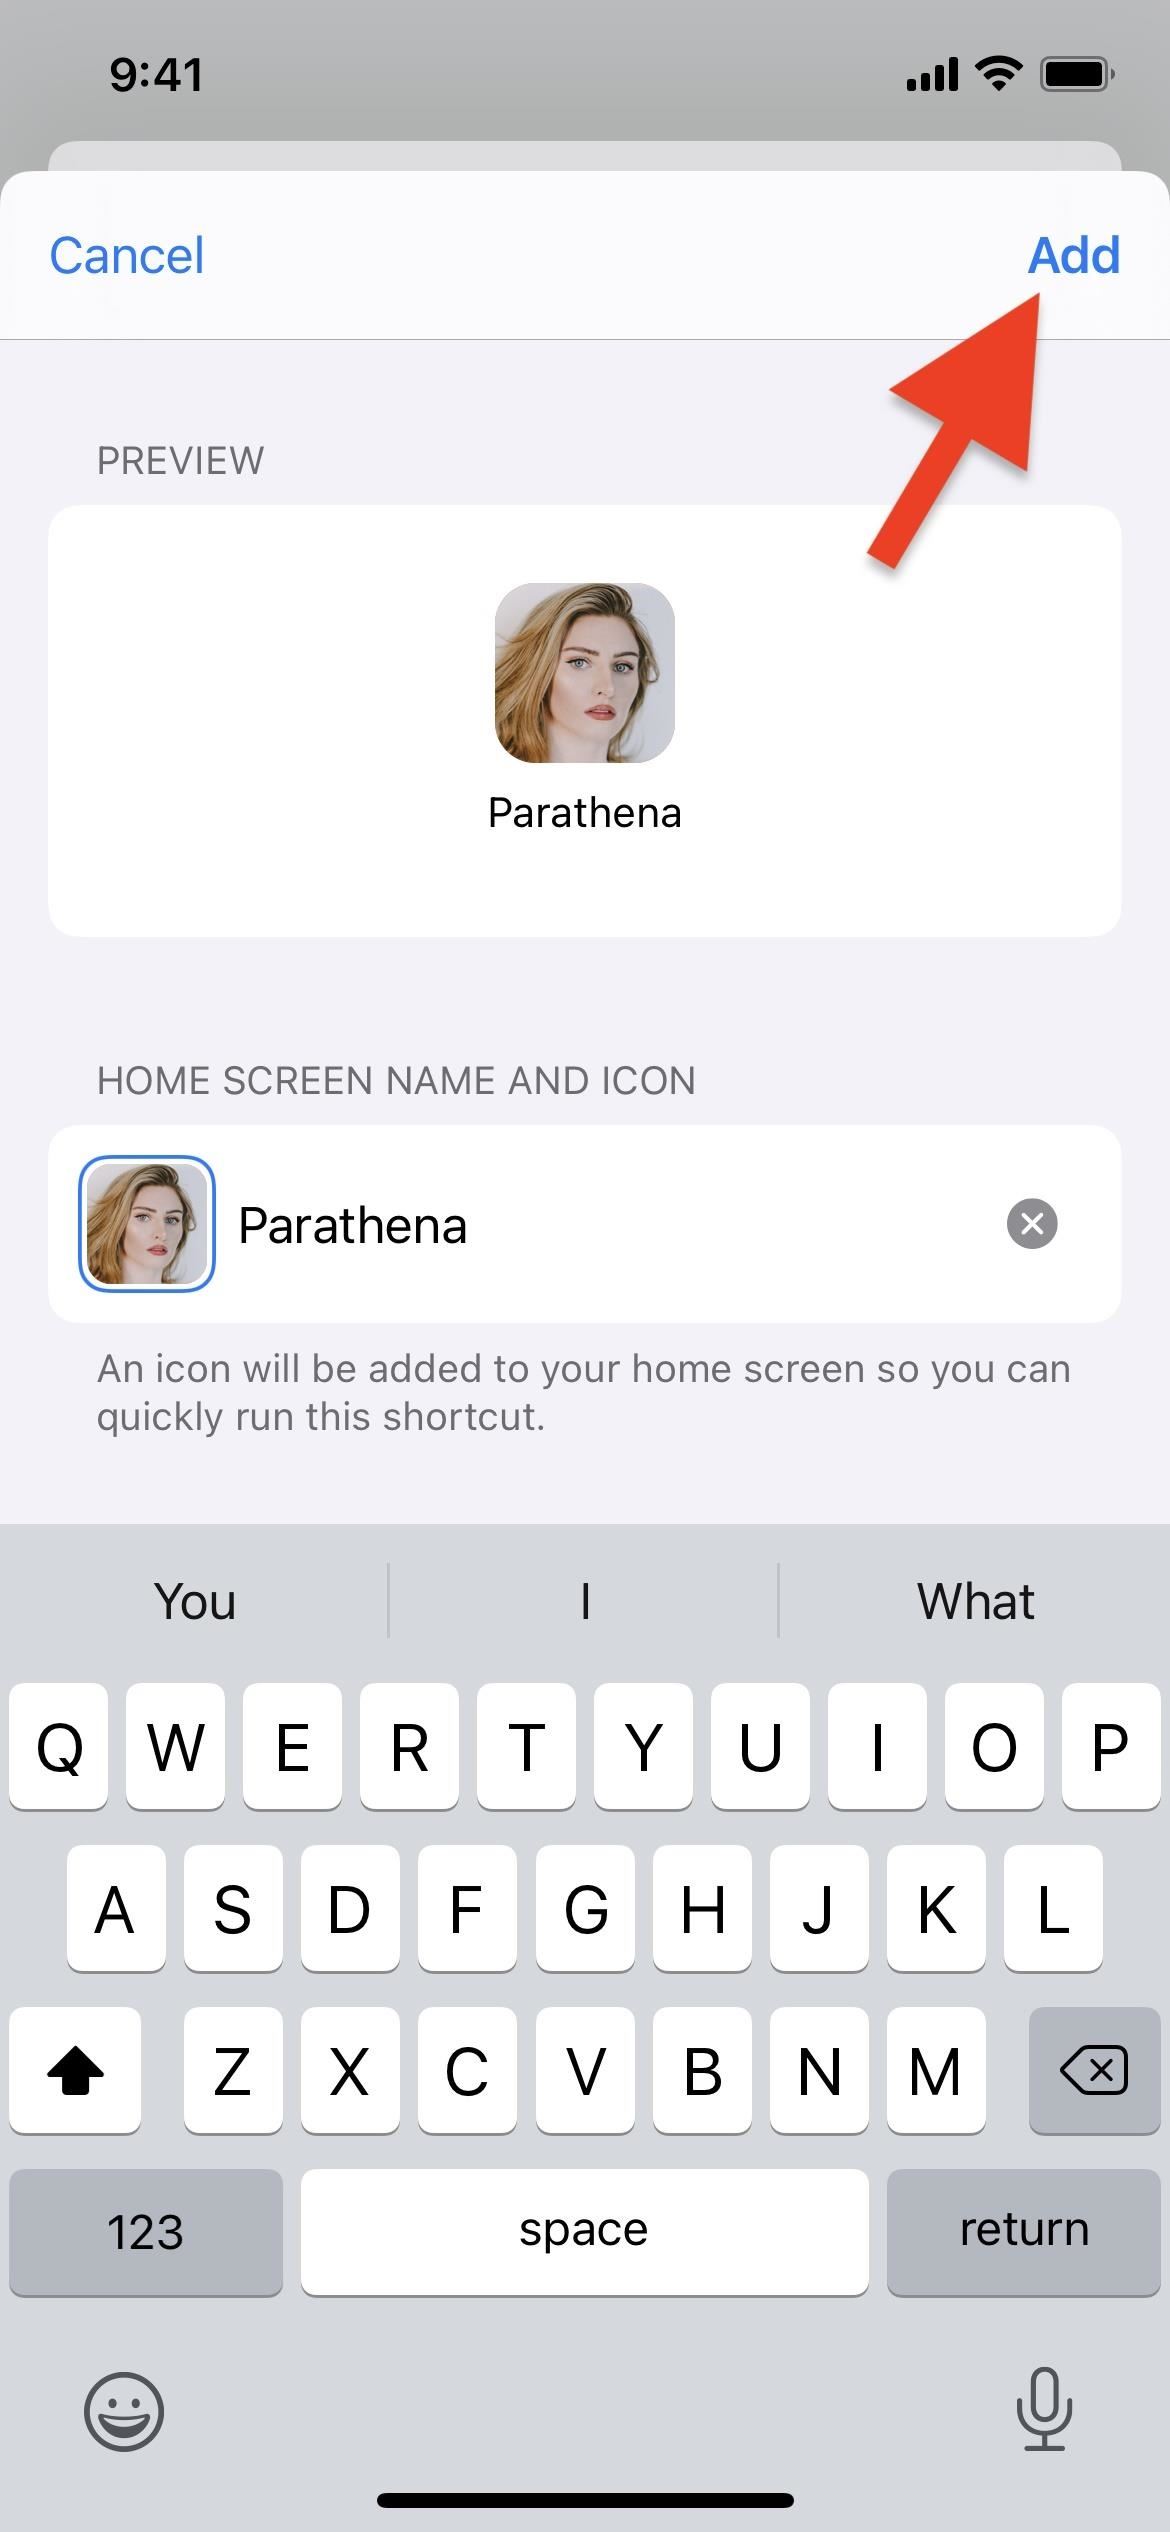 Turn Your Contacts into Apps on Your iPhone's Home Screen